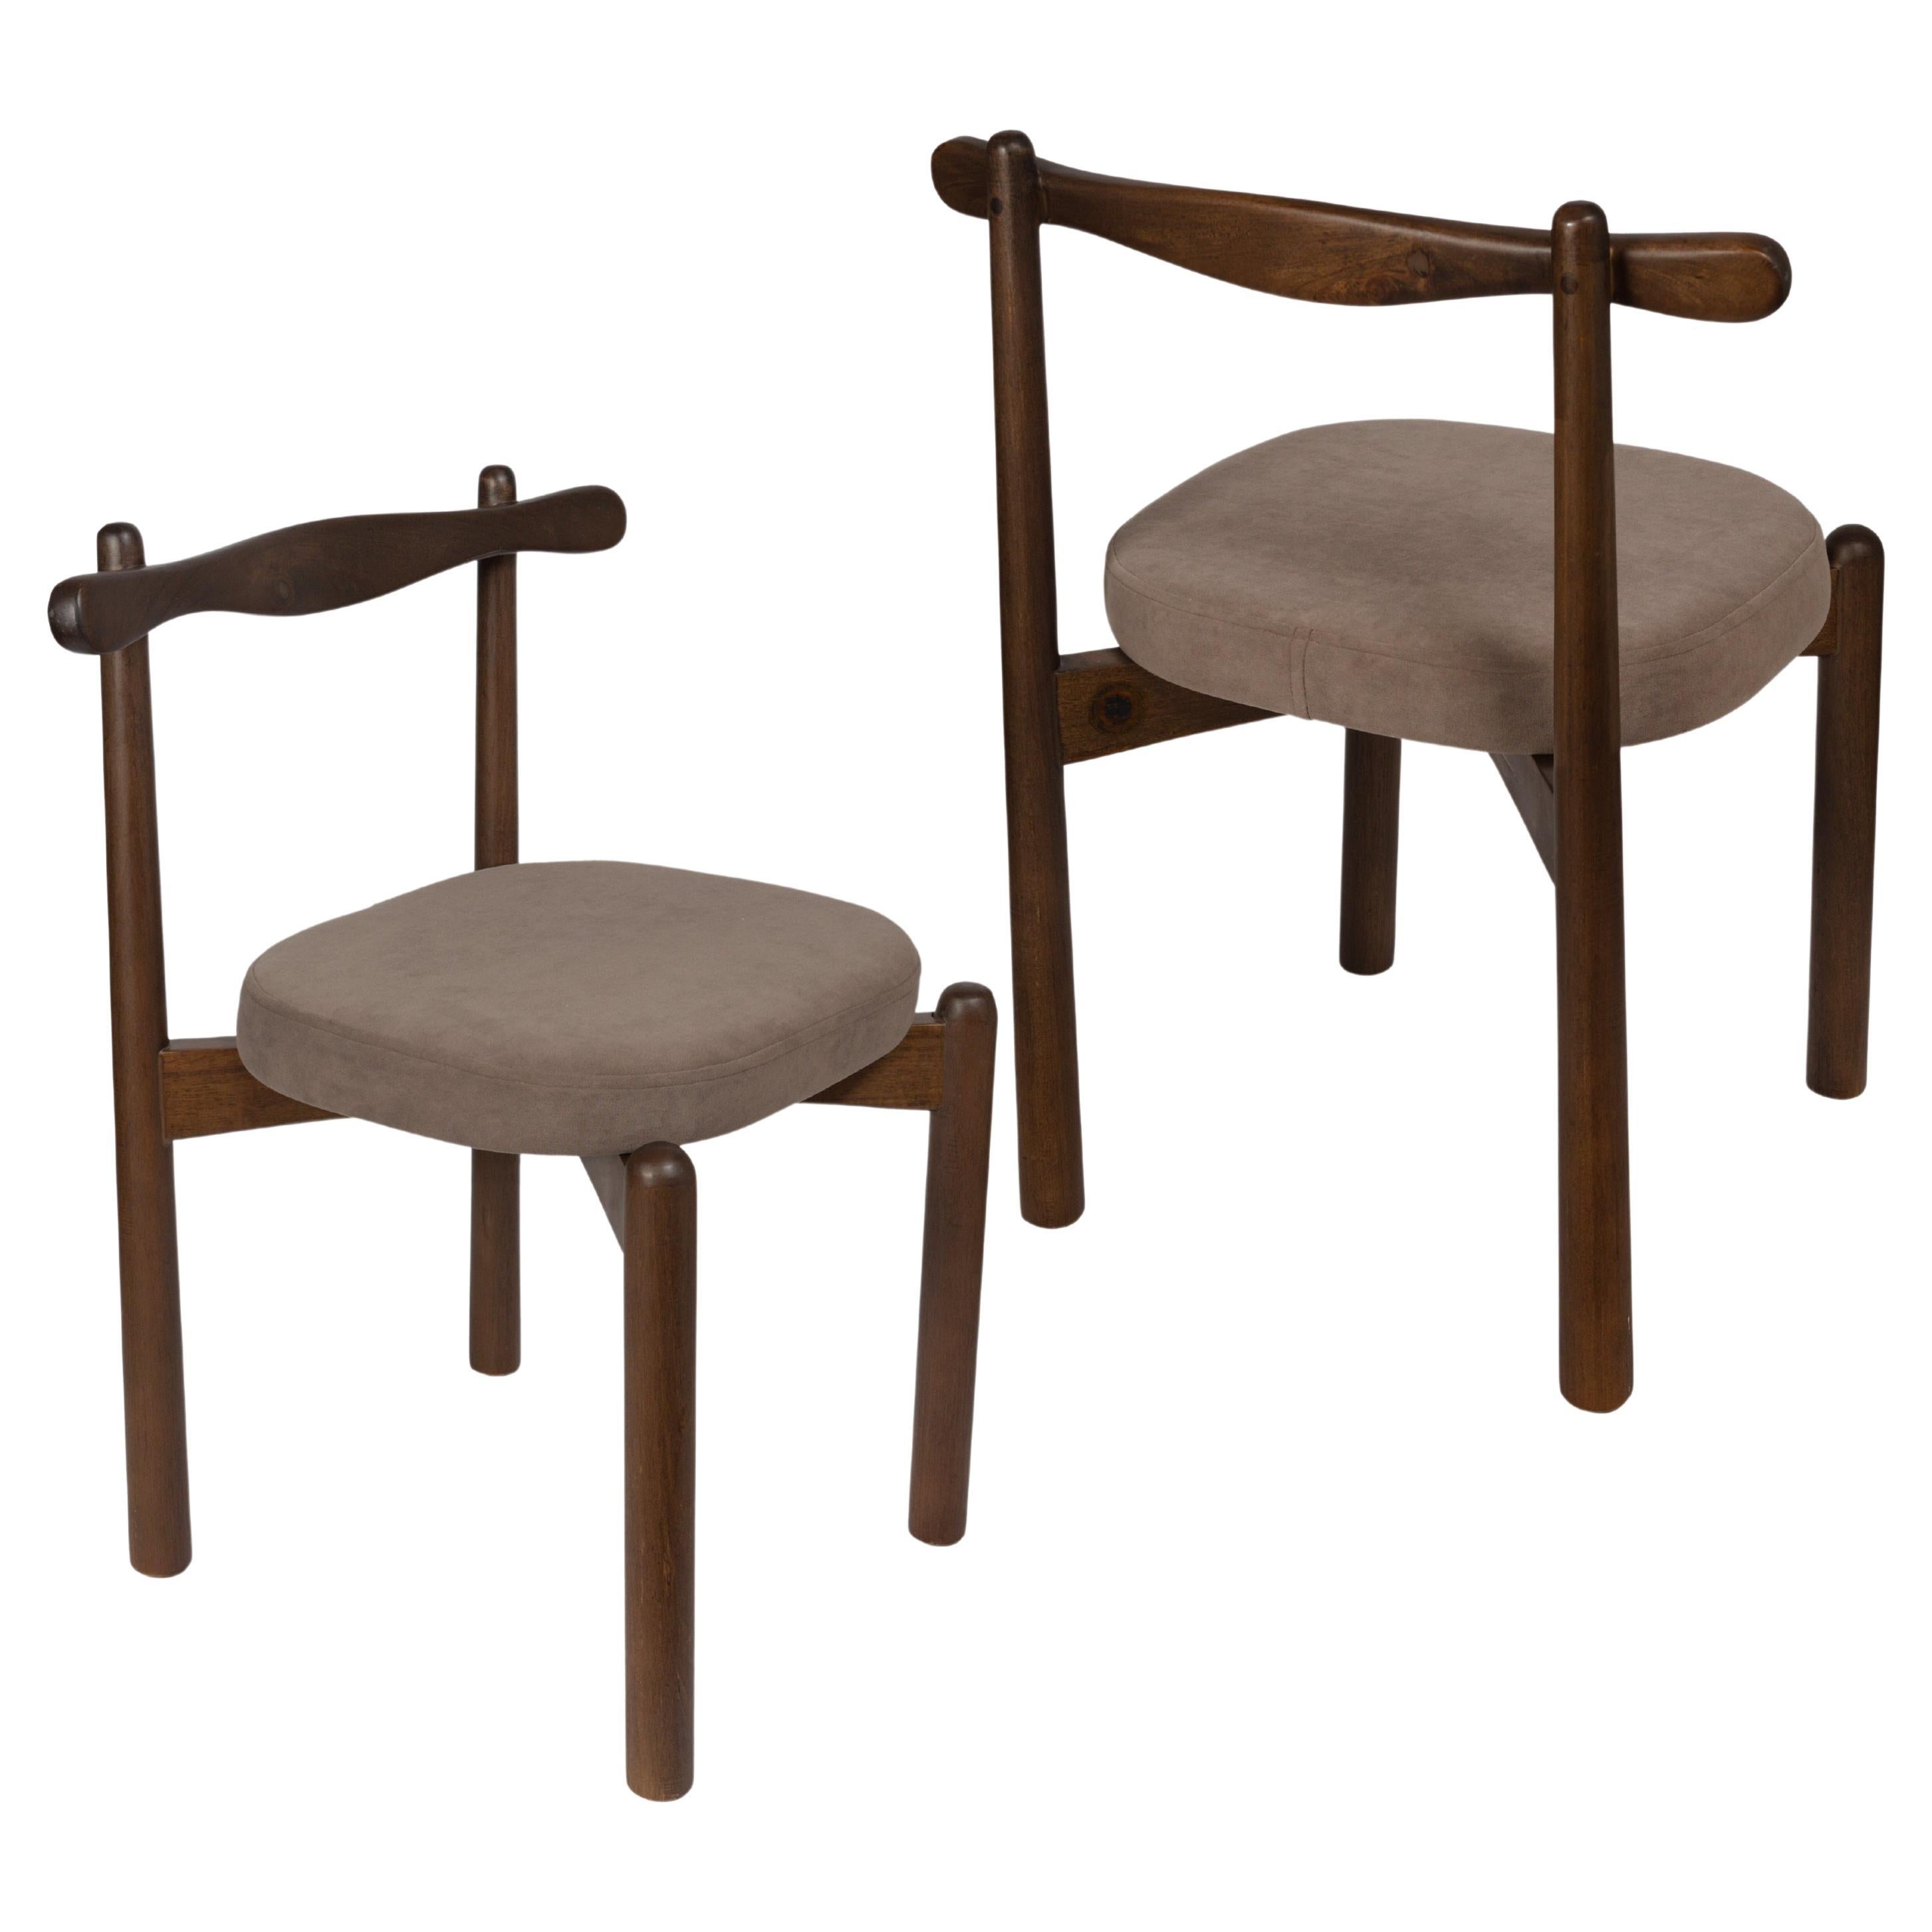 Set of 2 Dining Chairs Uçá Light Brown Wood (fabric ref : F20) For Sale